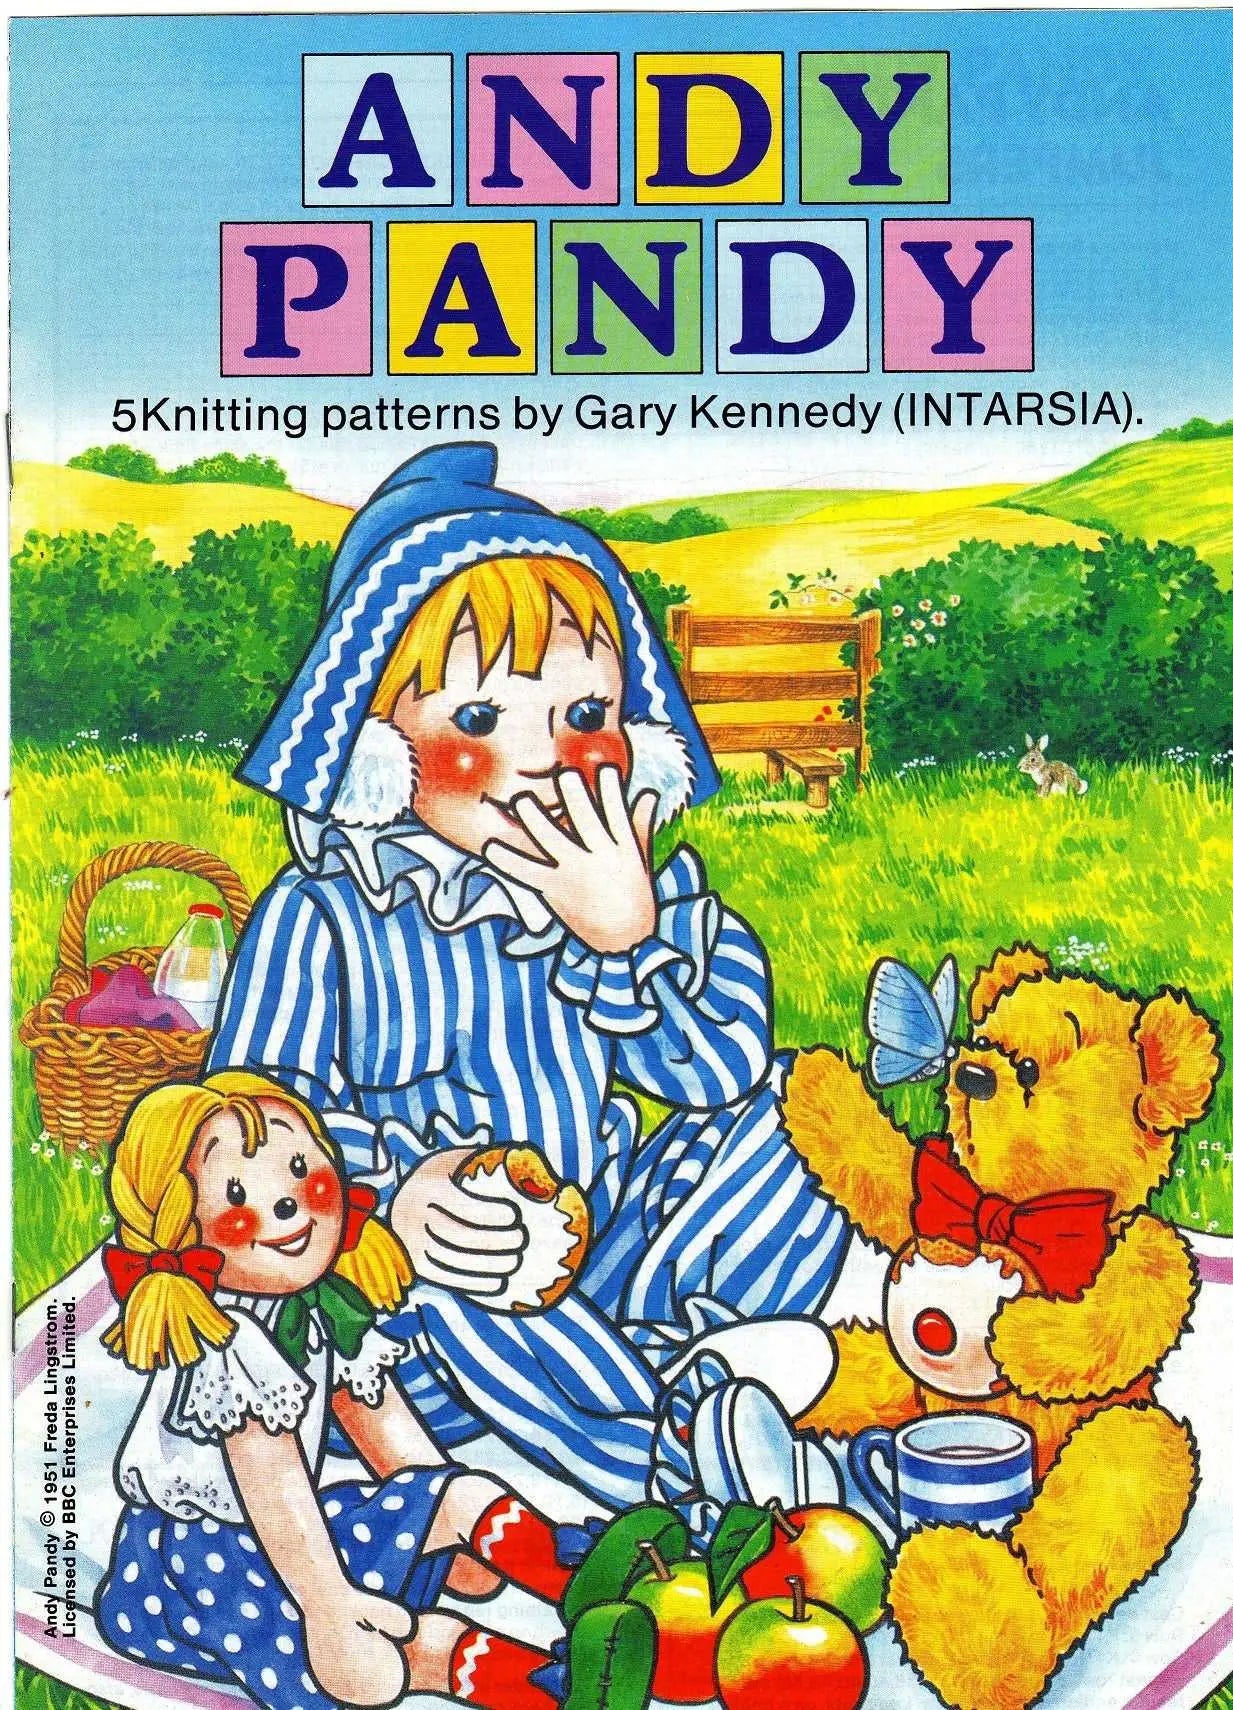  Andy Pandy Jumper Knitting Pattern by Cross Stitch Chart Heaven sold by Free Spirit Accessories